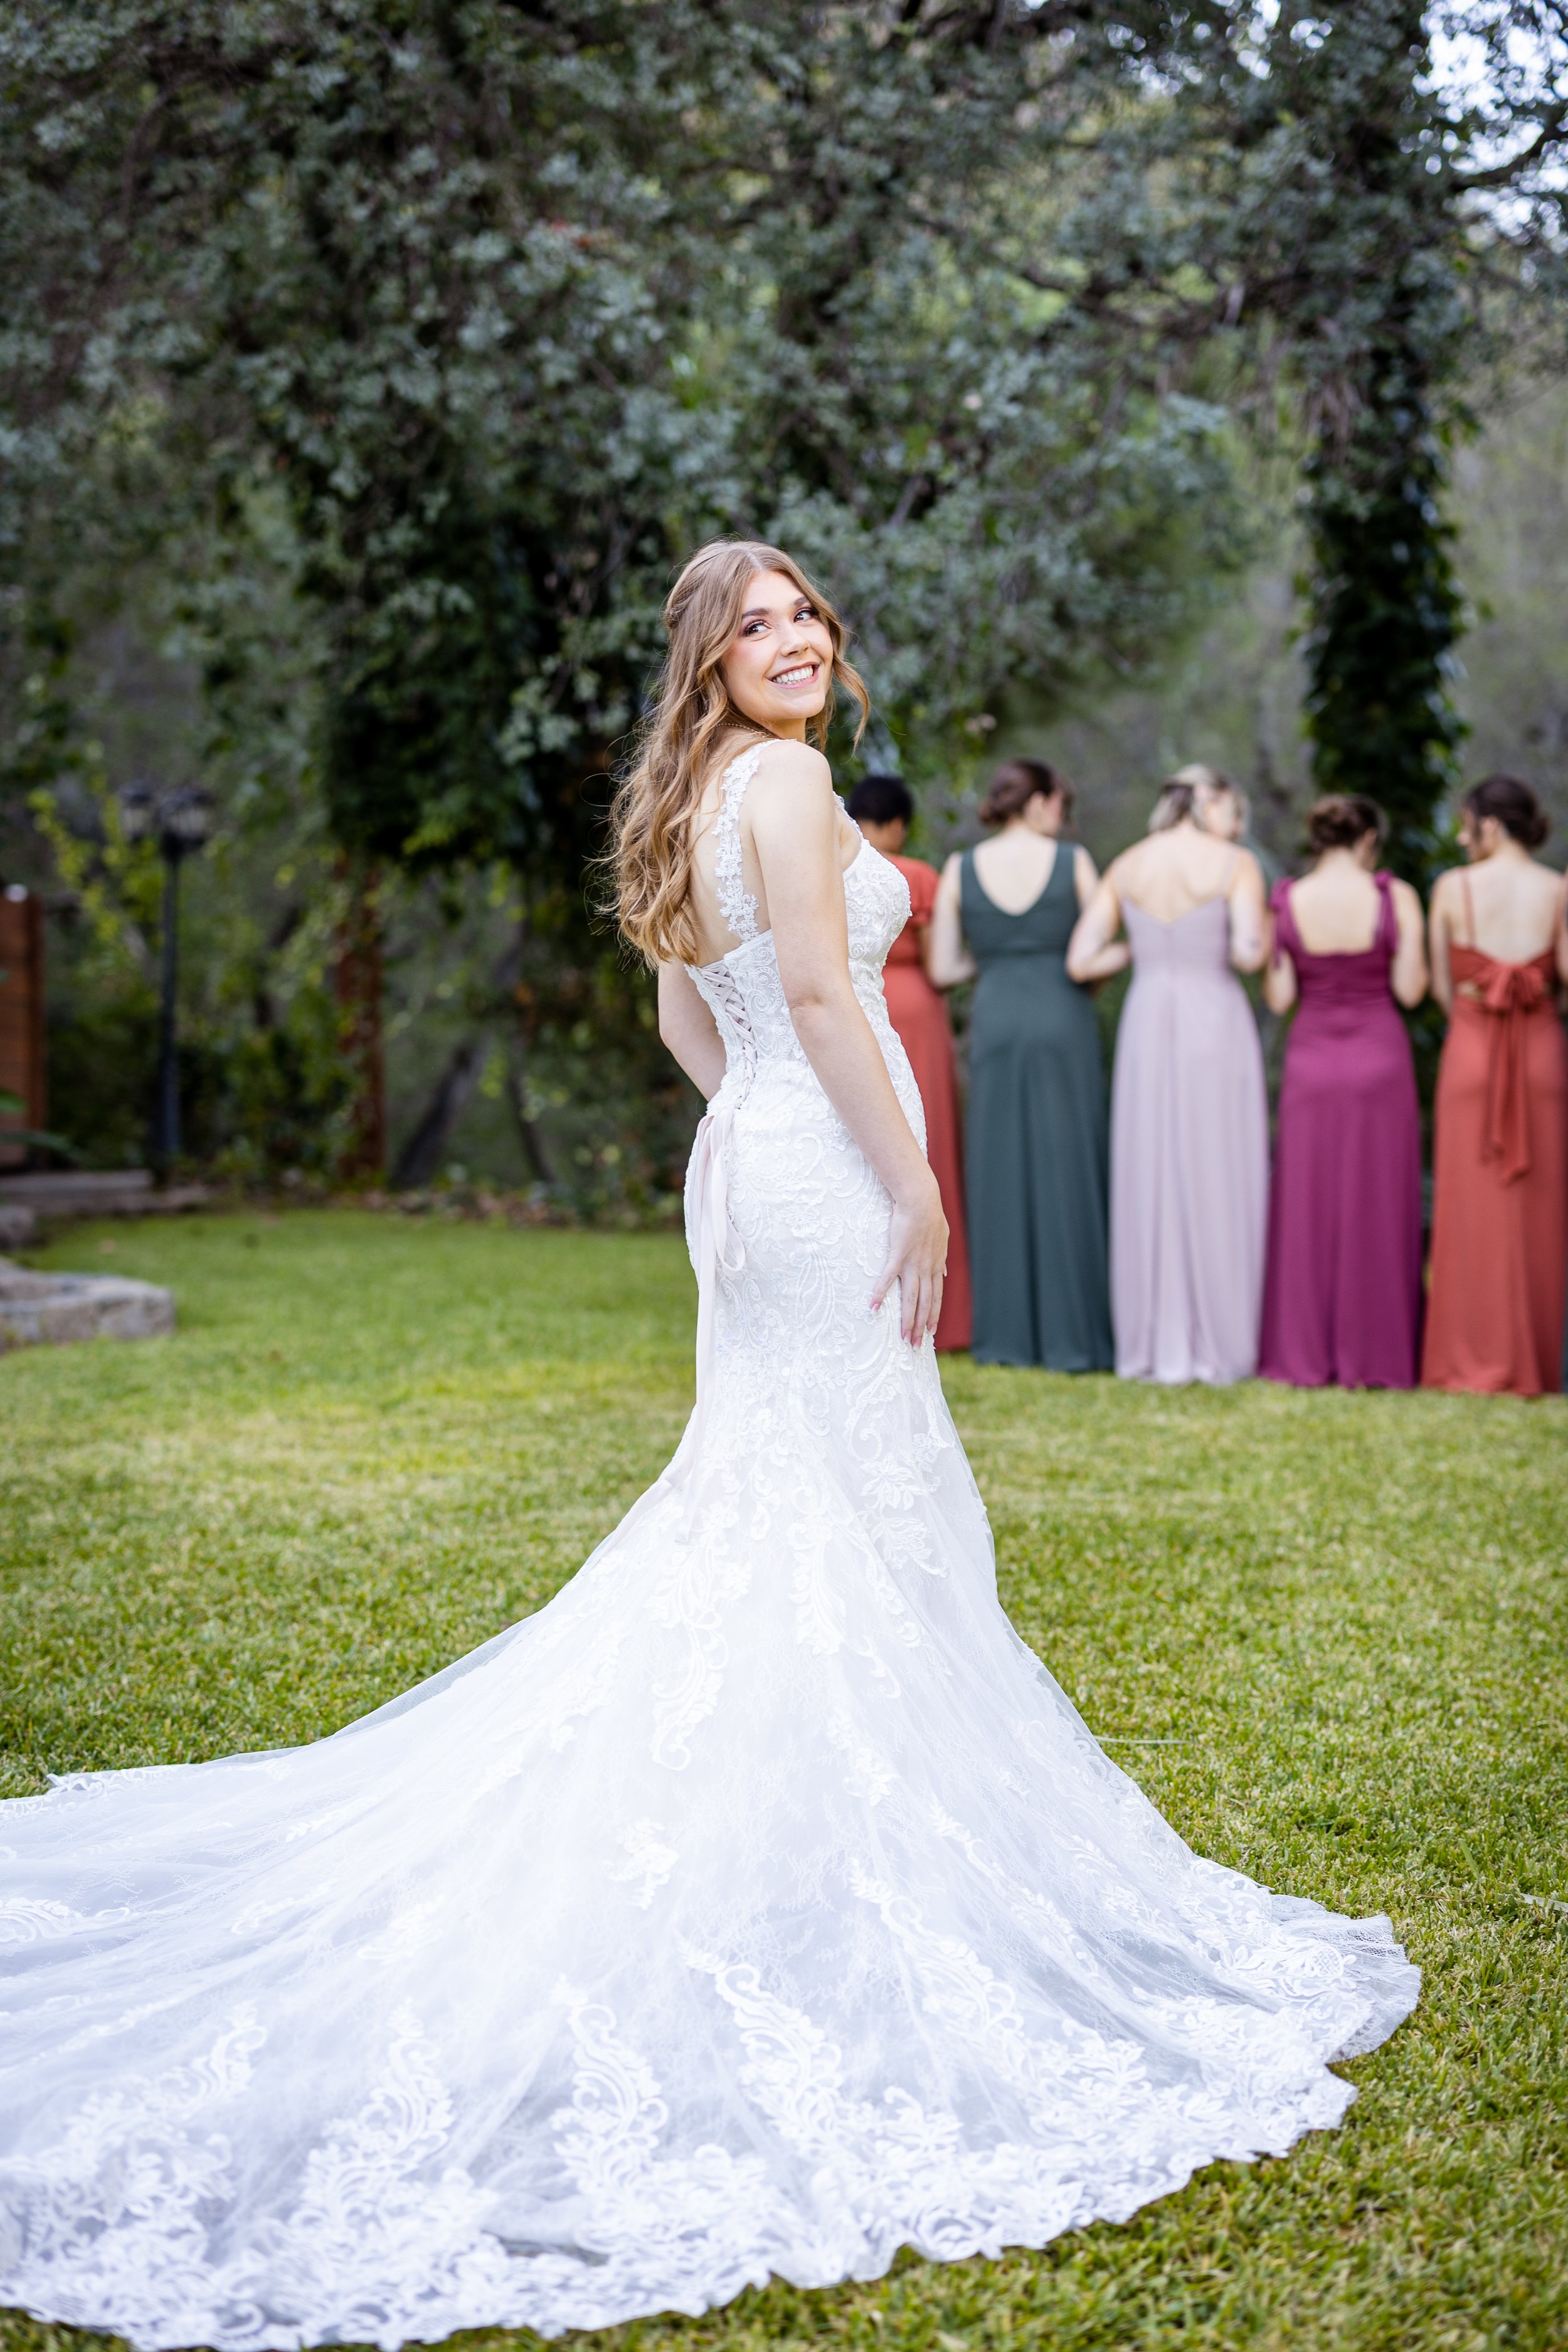 First look with bridesmaids at Secluded Garden Estate